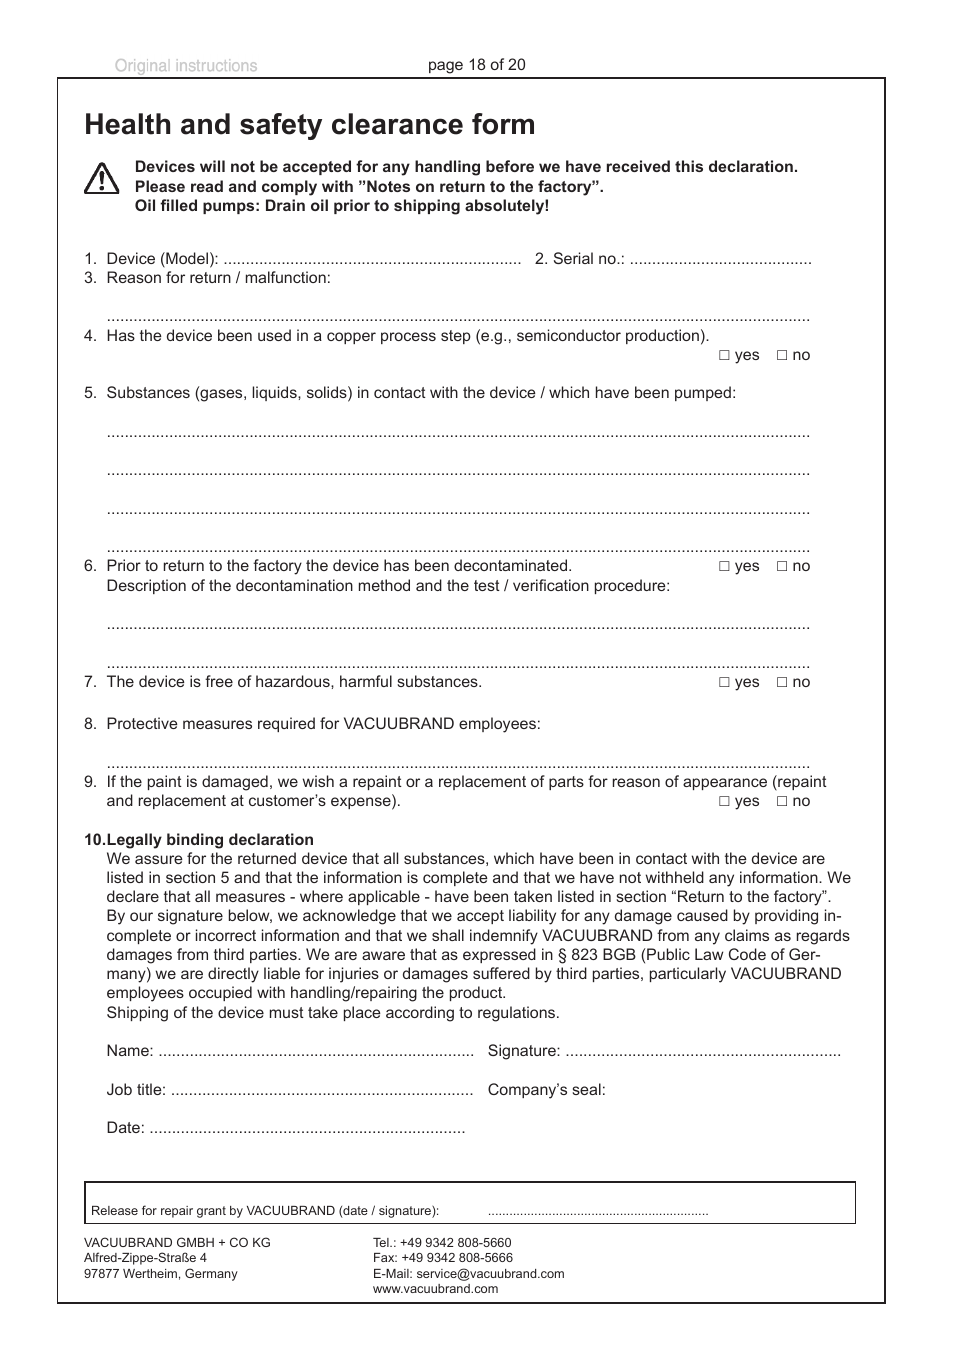 Health and safety clearance form | VACUUBRAND MPT 200 User Manual | Page 18 / 20